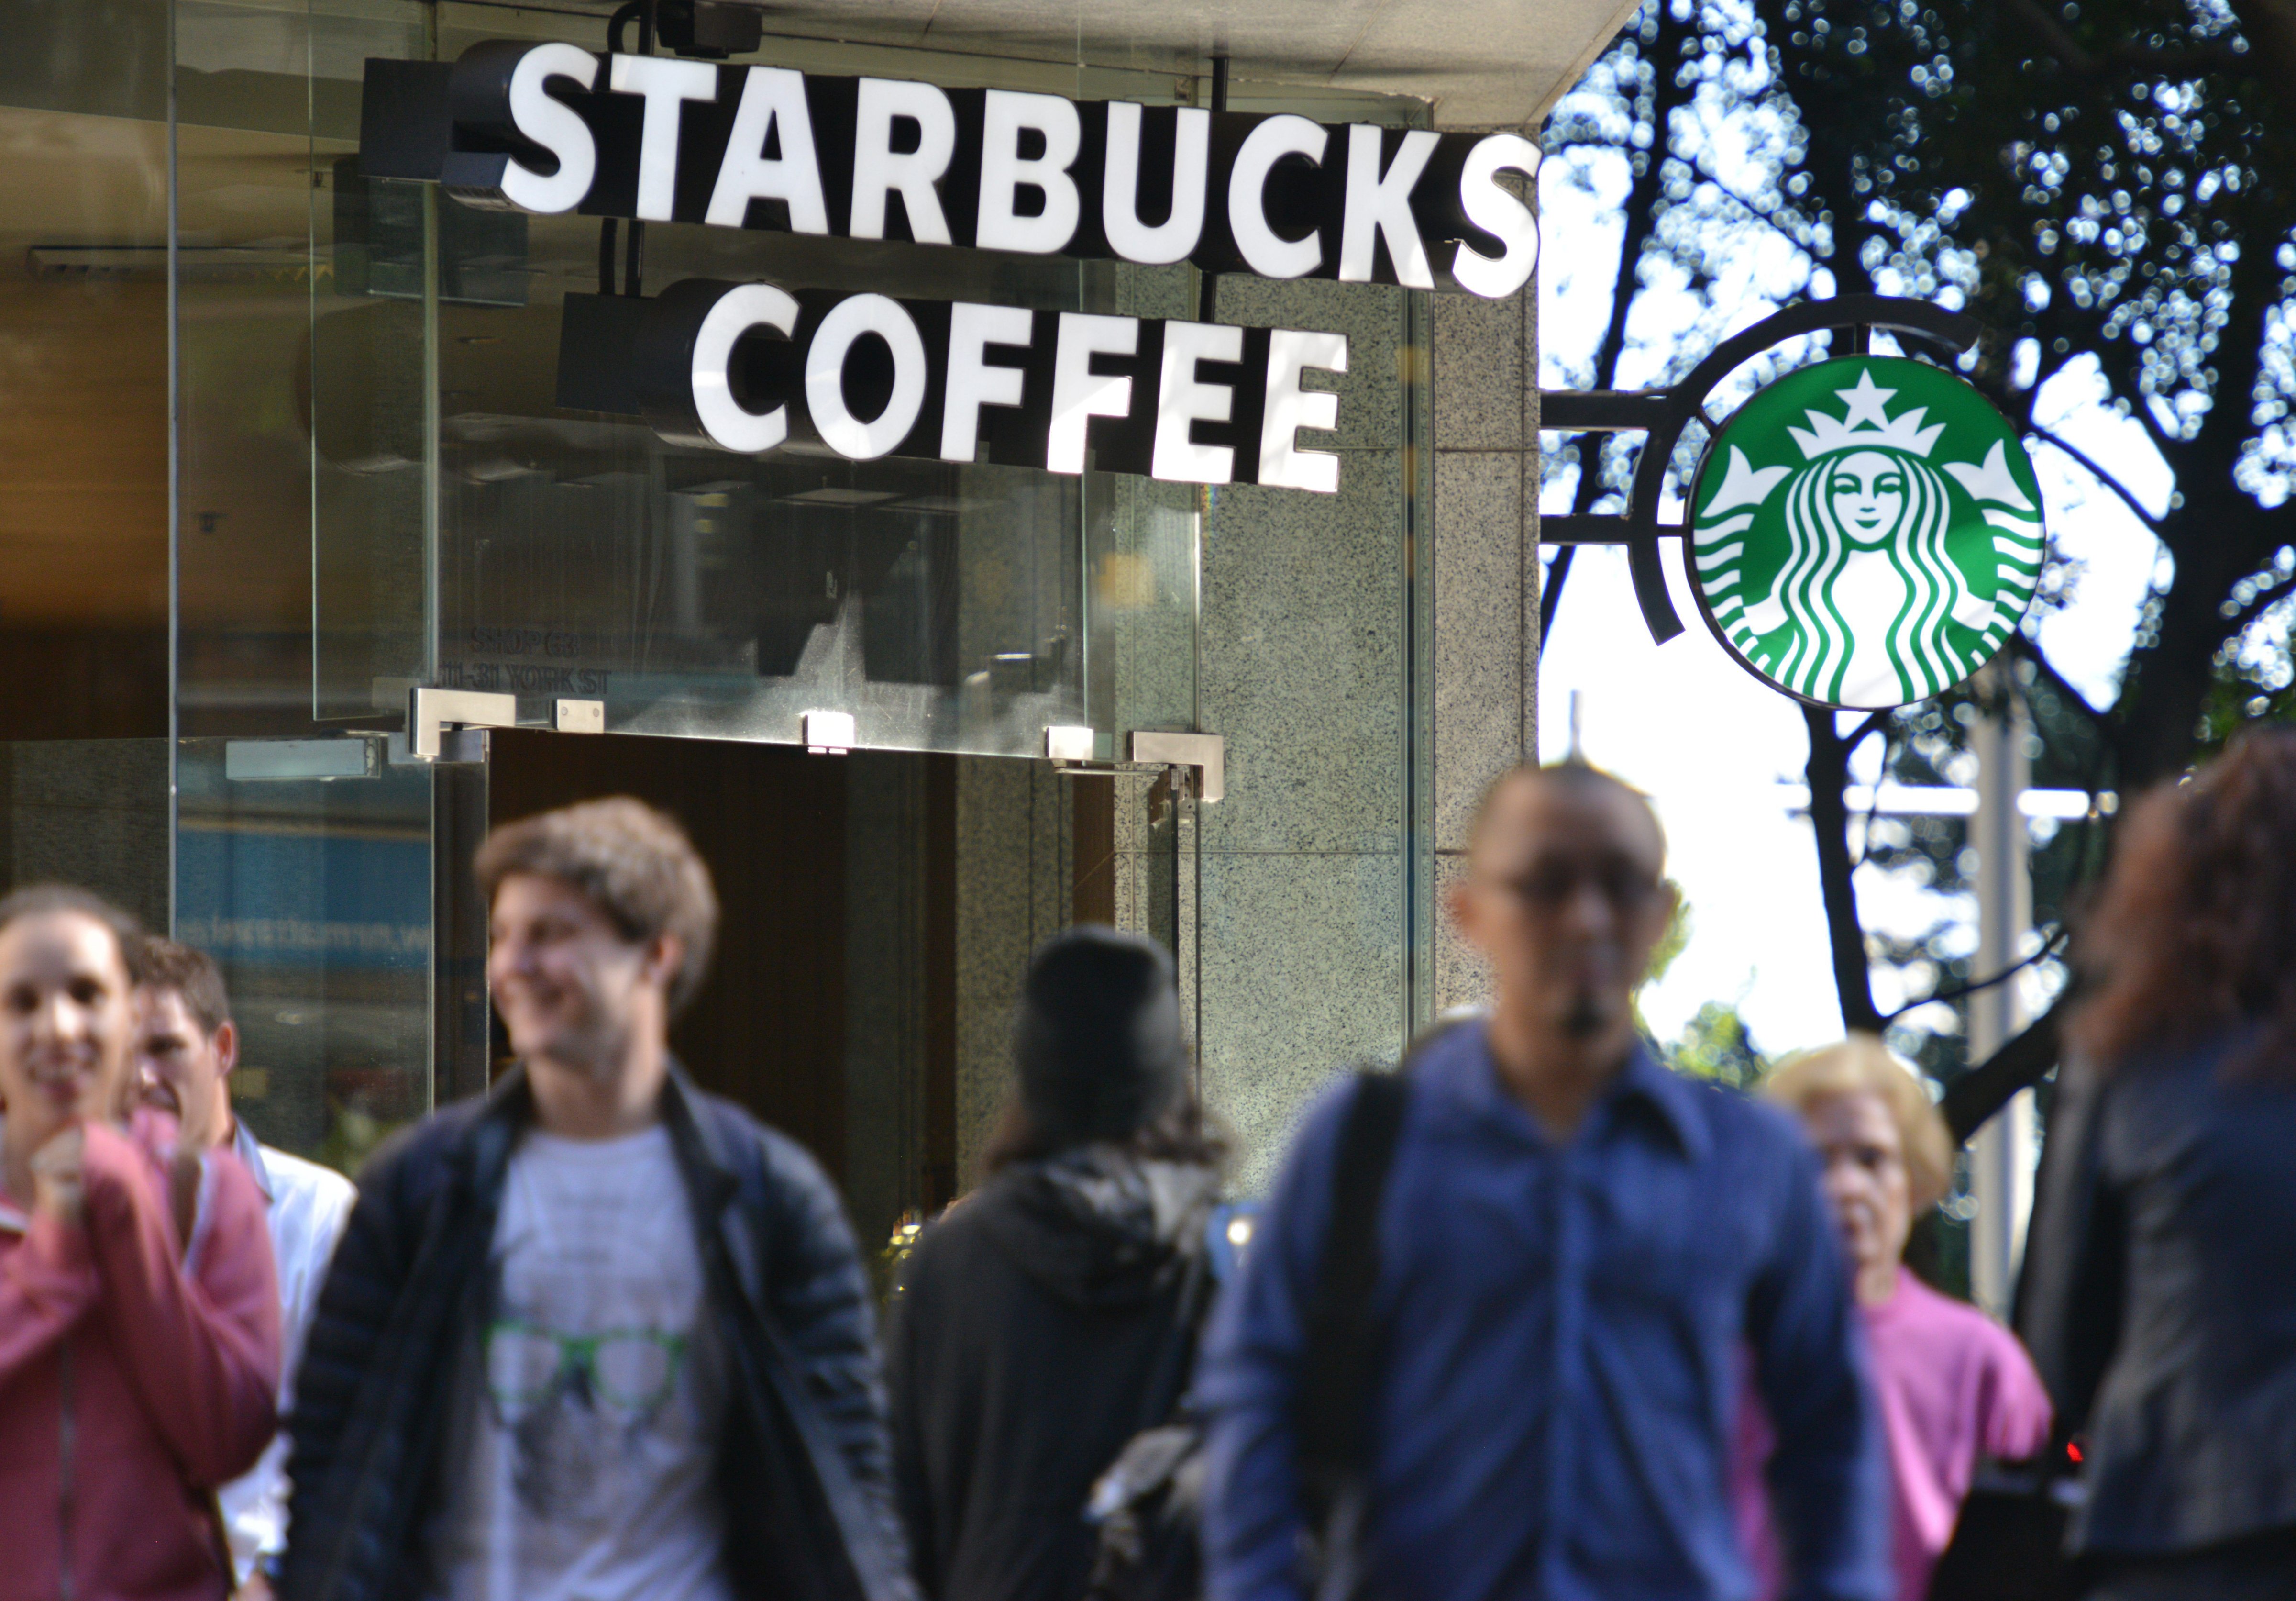 Pedestrians cross a street in front of a Starbucks coffee house in Sydney on May 28, 2014. (Peter Parks&mdash;AFP/Getty Images)